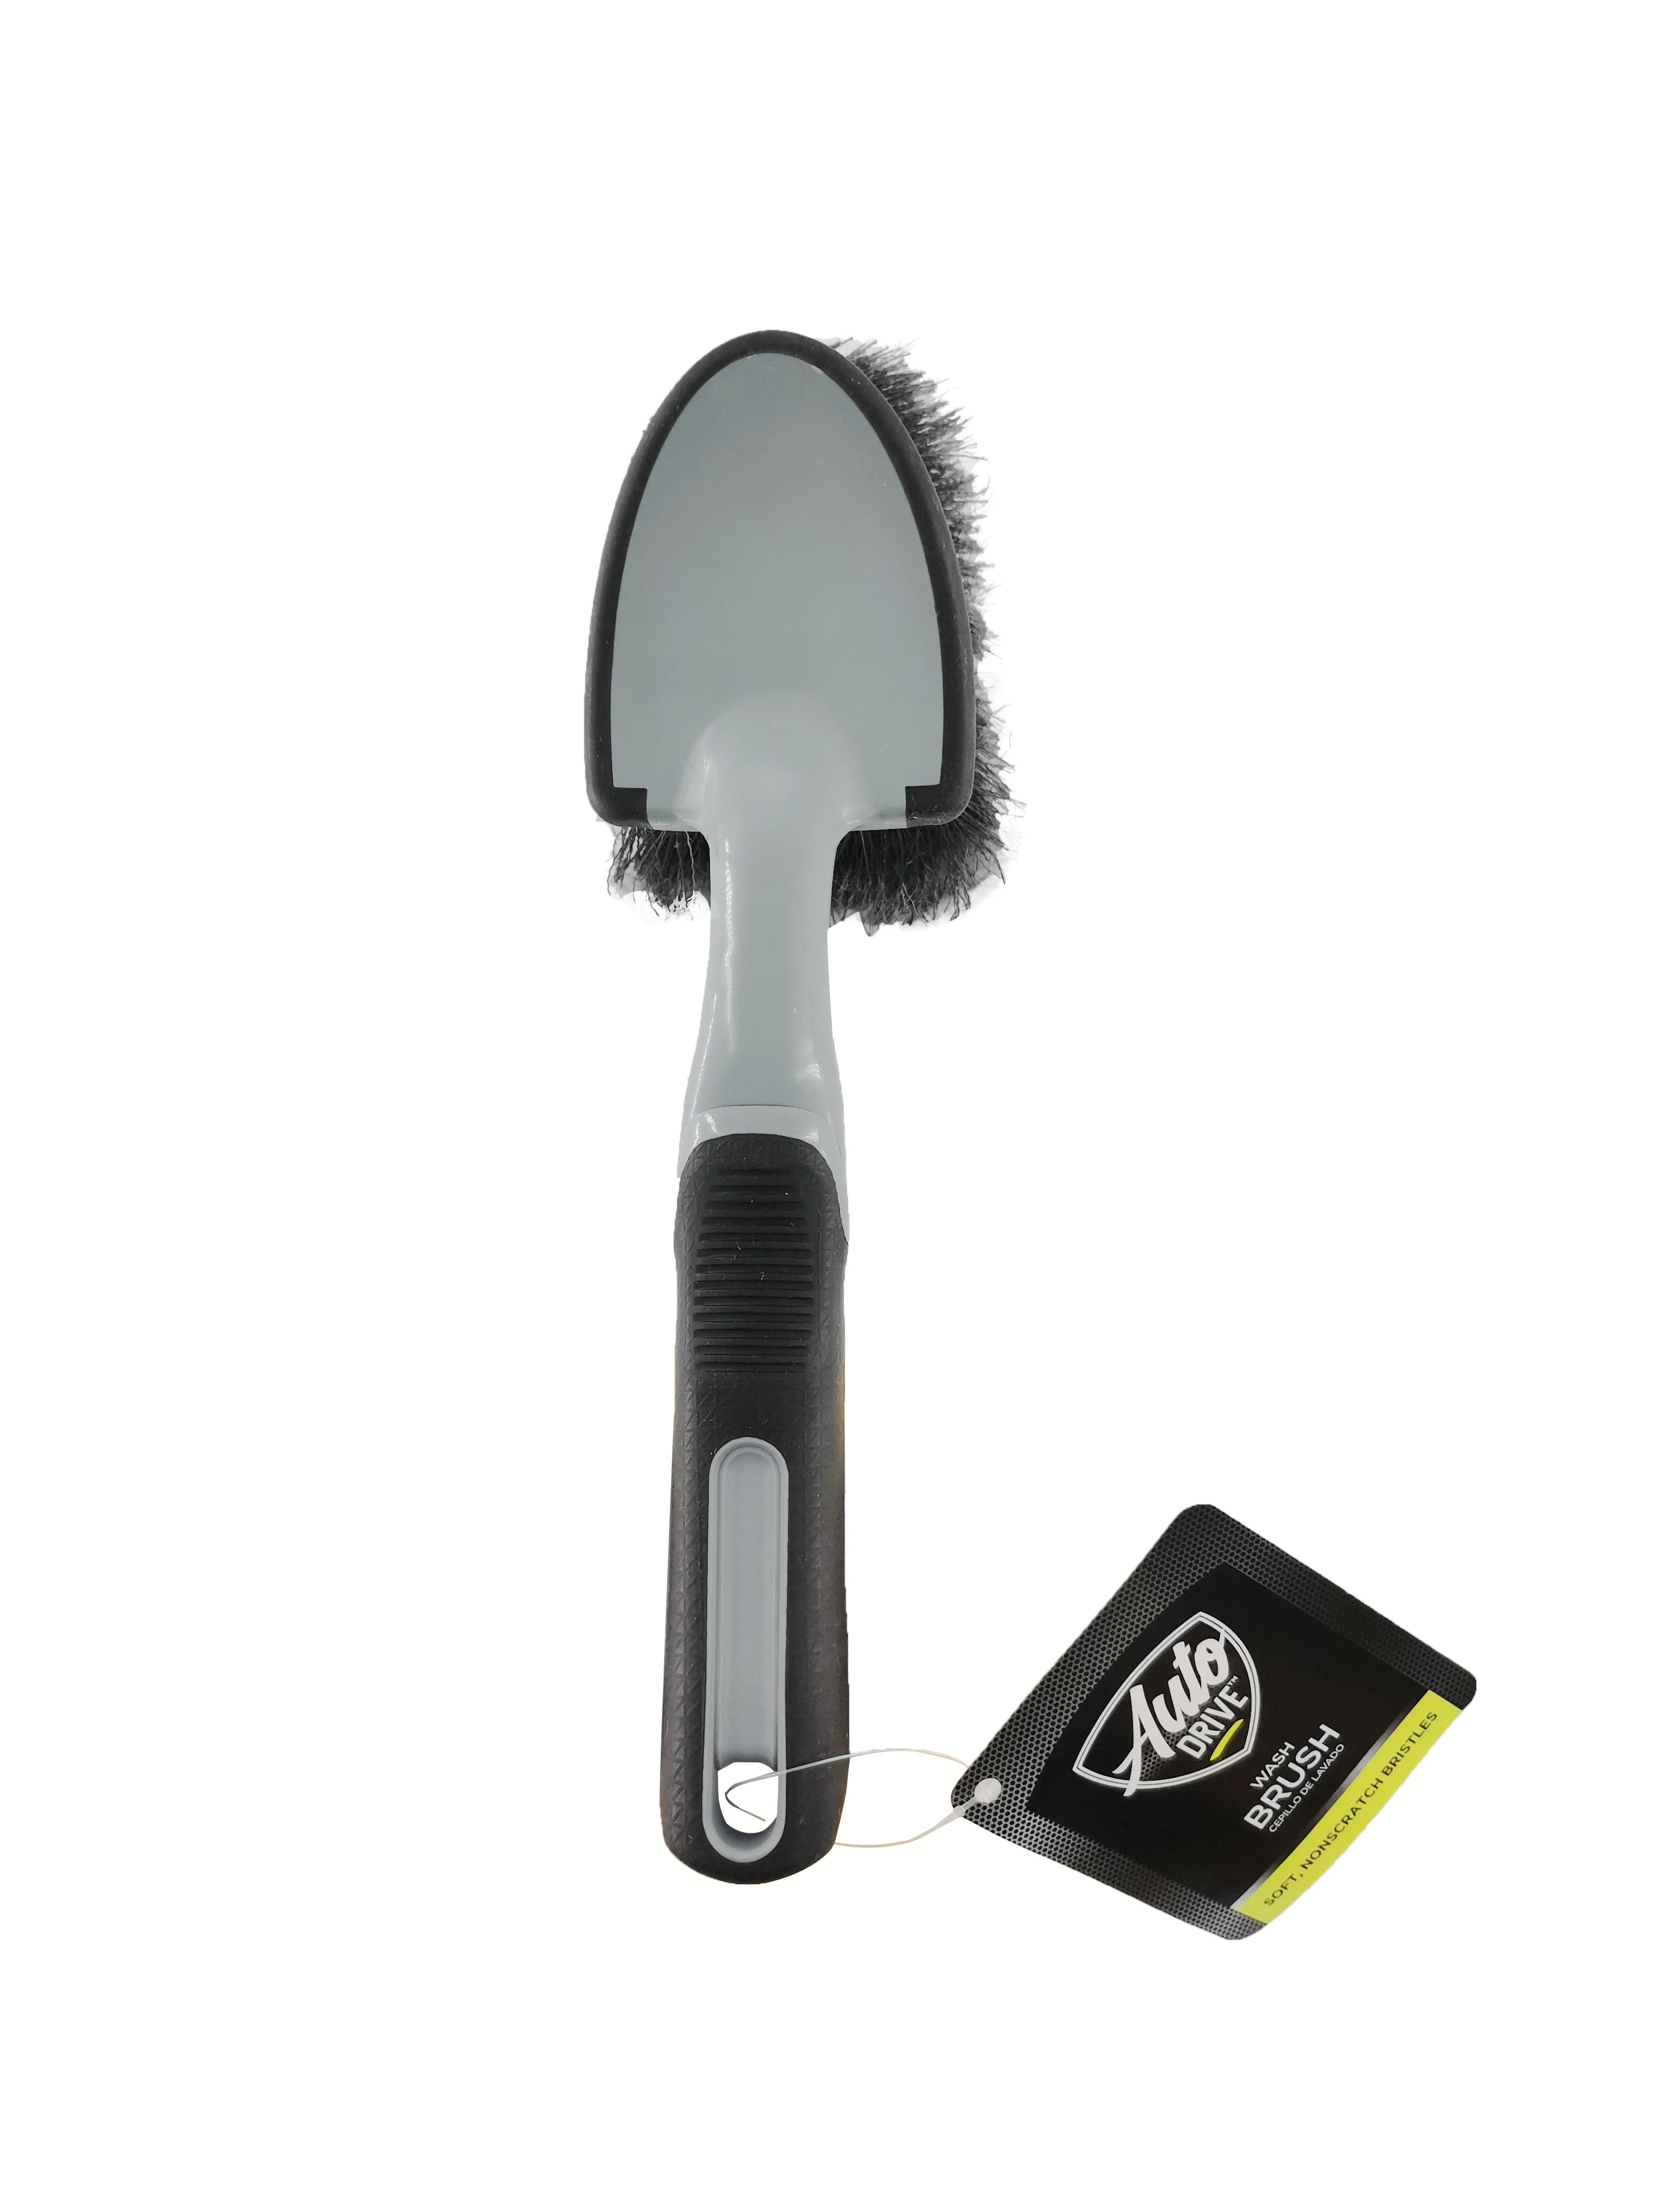 Auto Drive Car Washing Tire Cleaning Brush, Grey